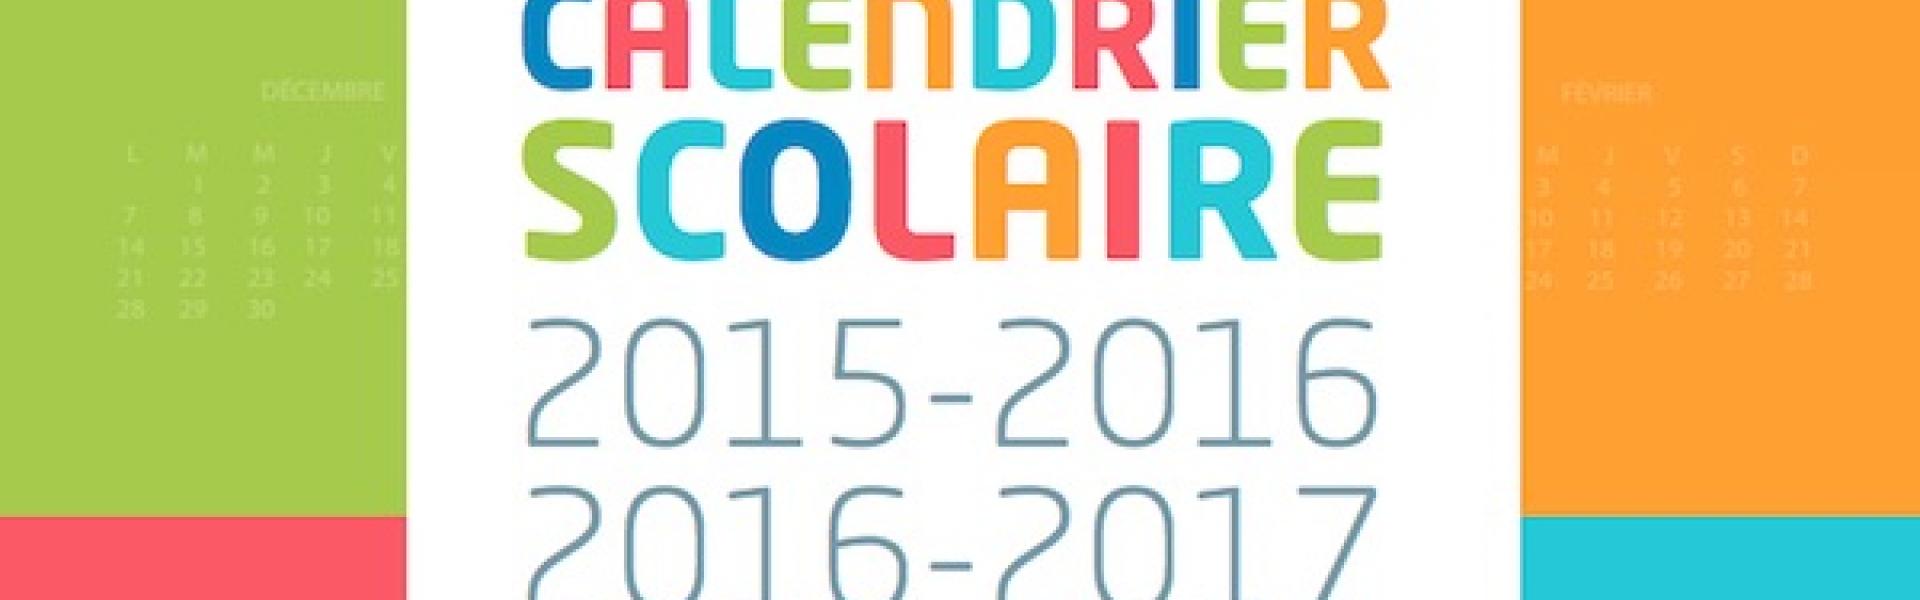 calendrier-scolaire.jpg